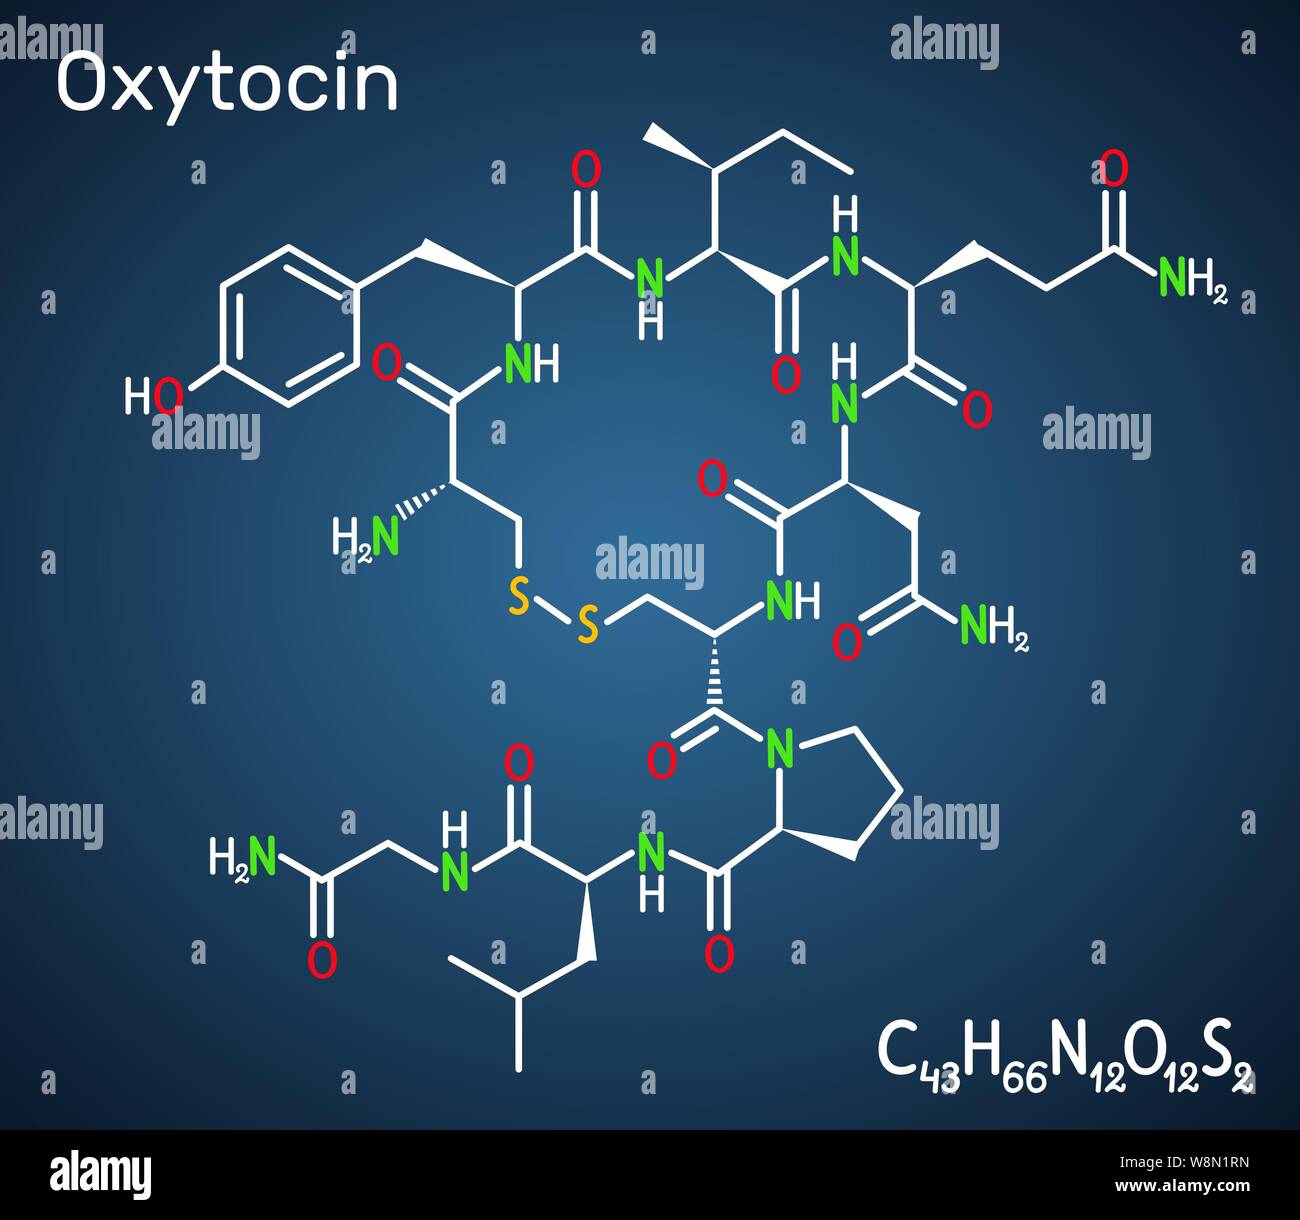 Oxytocin, Oxt, peptide hormone and neuropeptide molecule. Structural chemical formula on the dark blue background. Vector illustration Stock Vector